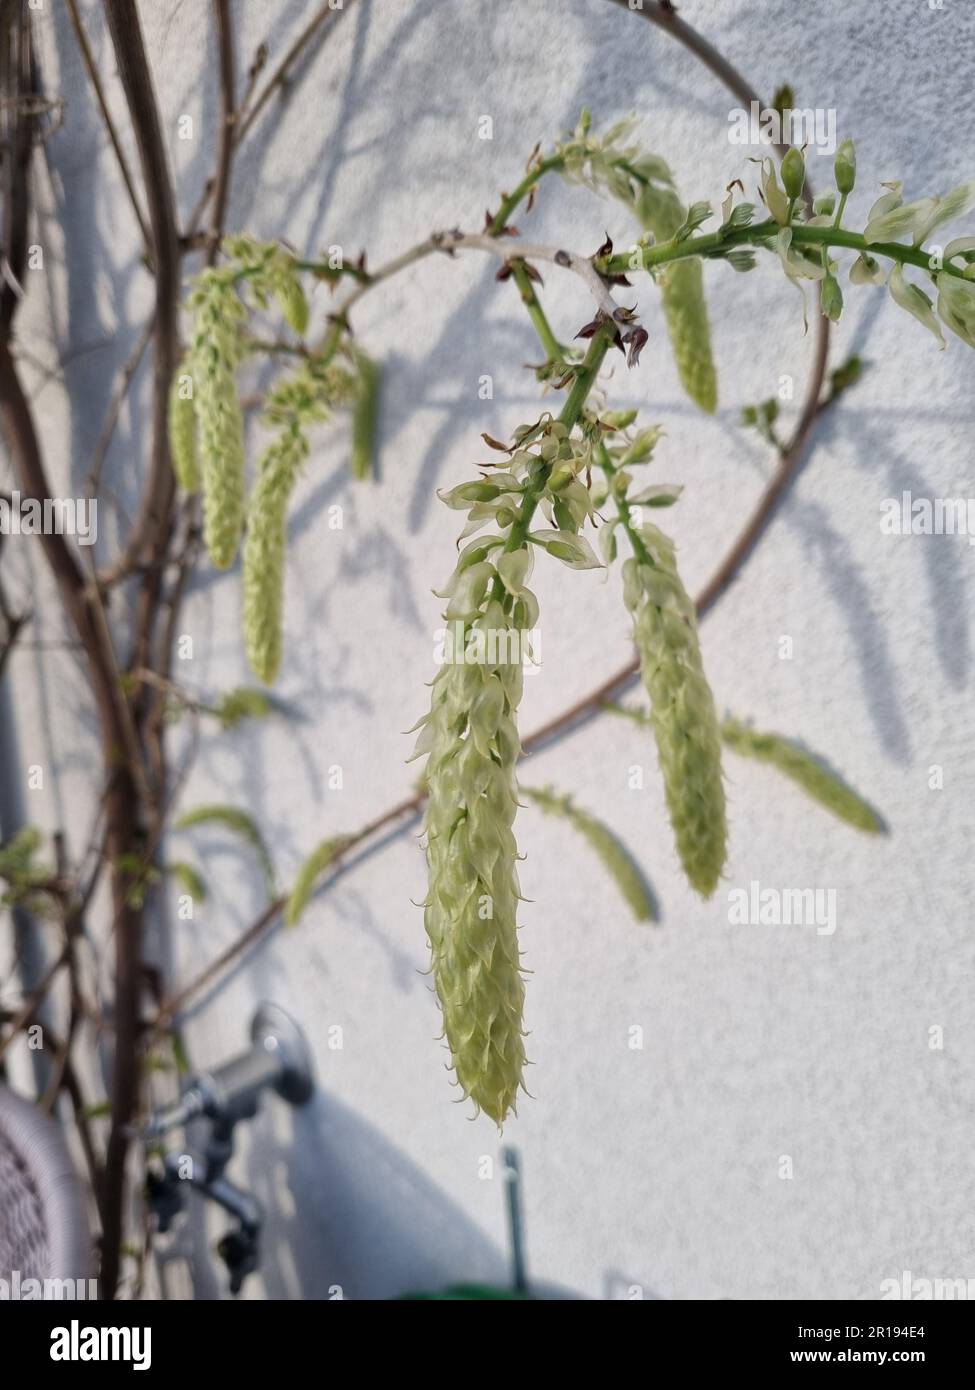 A closeup of a Salix udensis plant against a crisp white wall Stock Photo